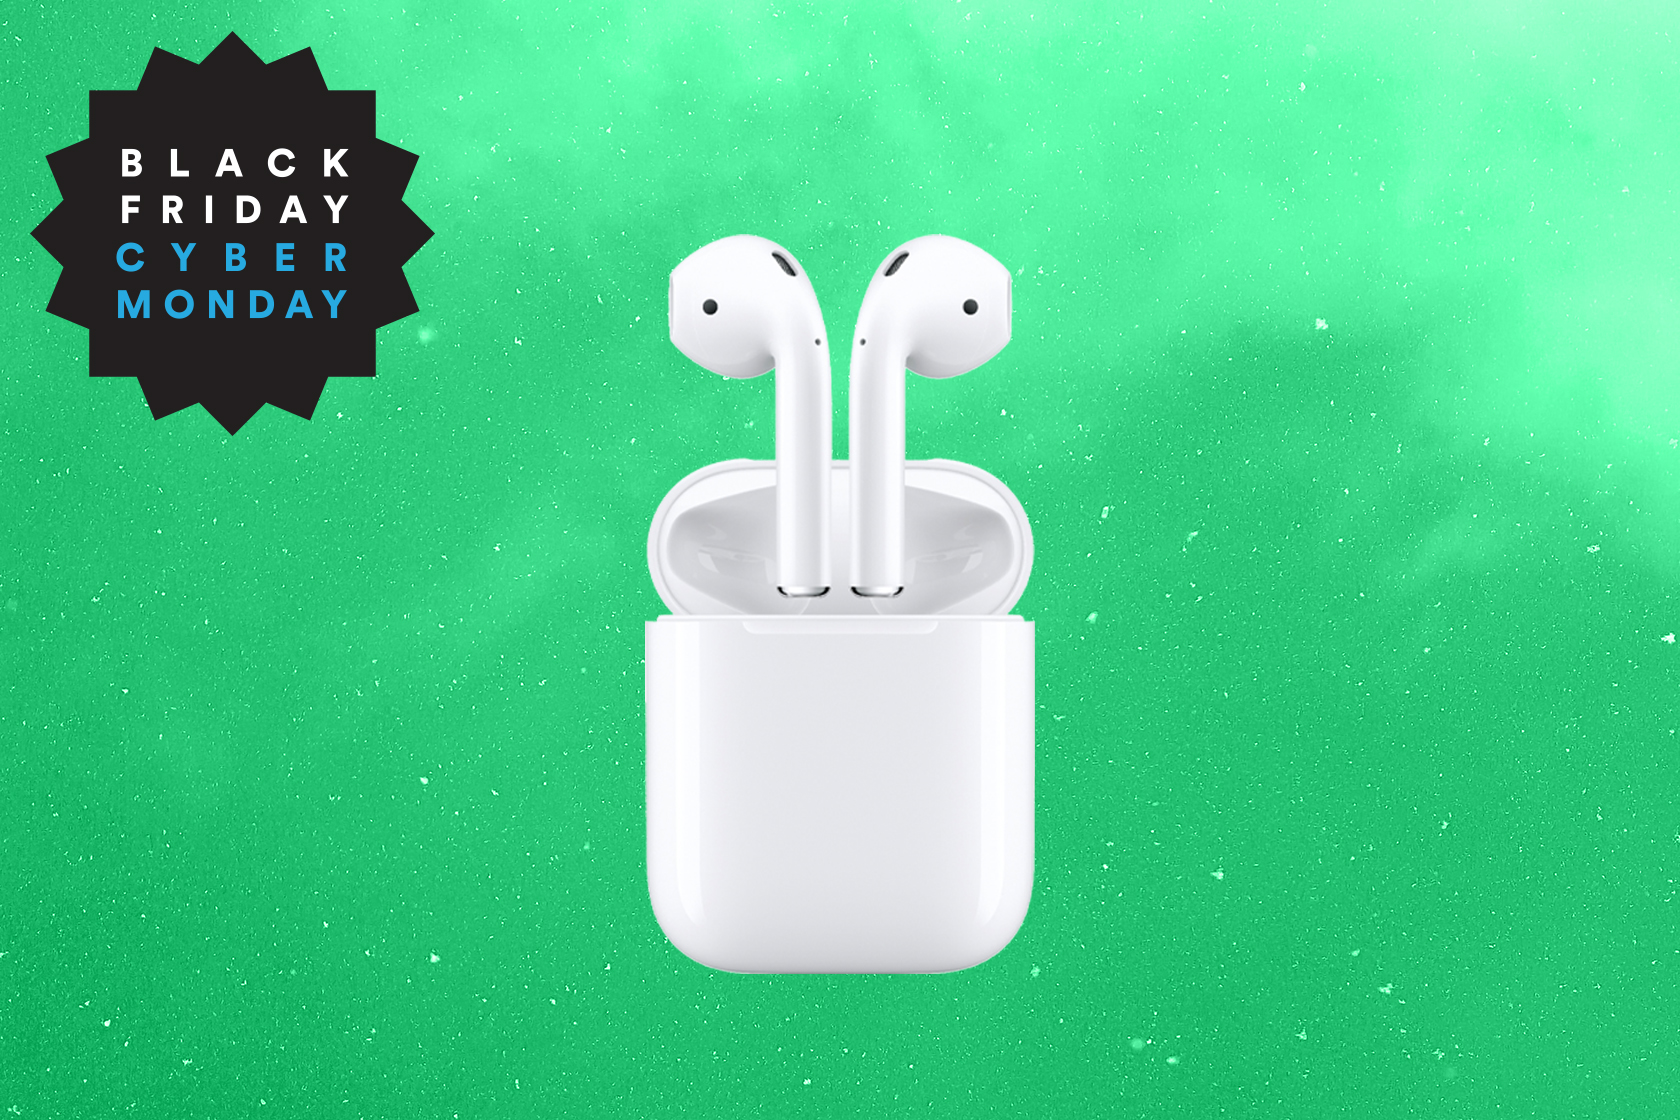 Best has the best price for Apple AirPods right now